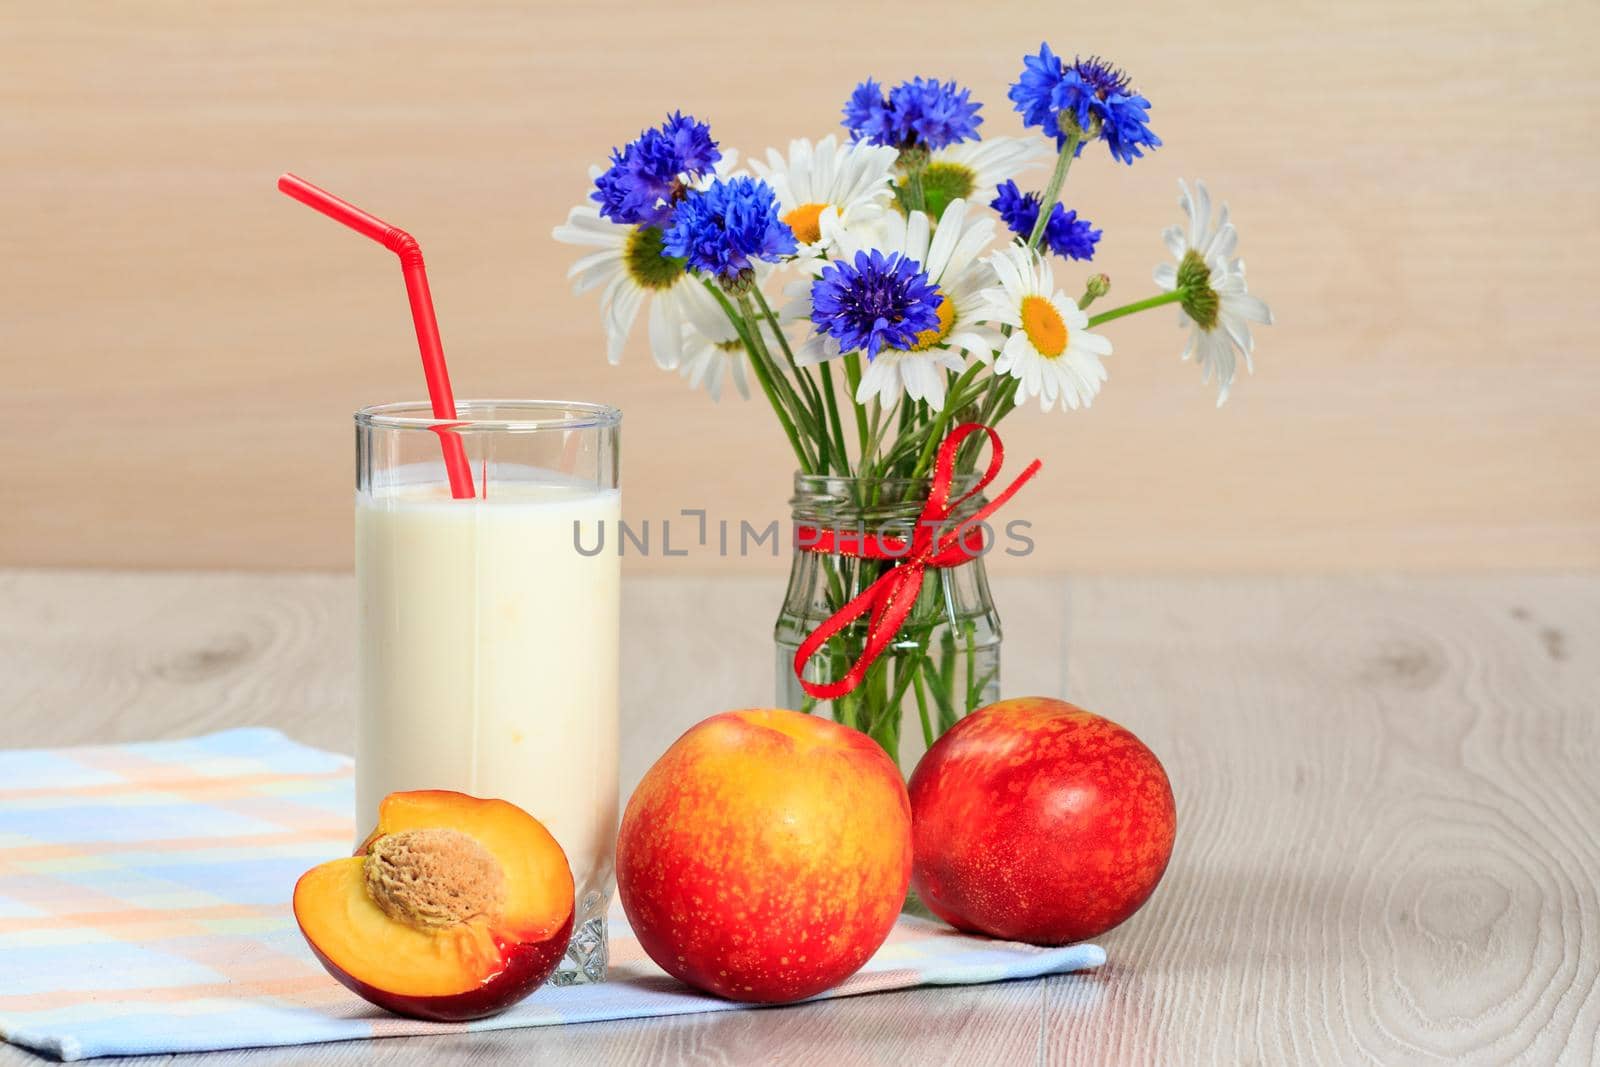 Glass of delicious yogurt with mint and fresh nectarine, chamomile and cornflowers in vase on a wooden table with a napkin